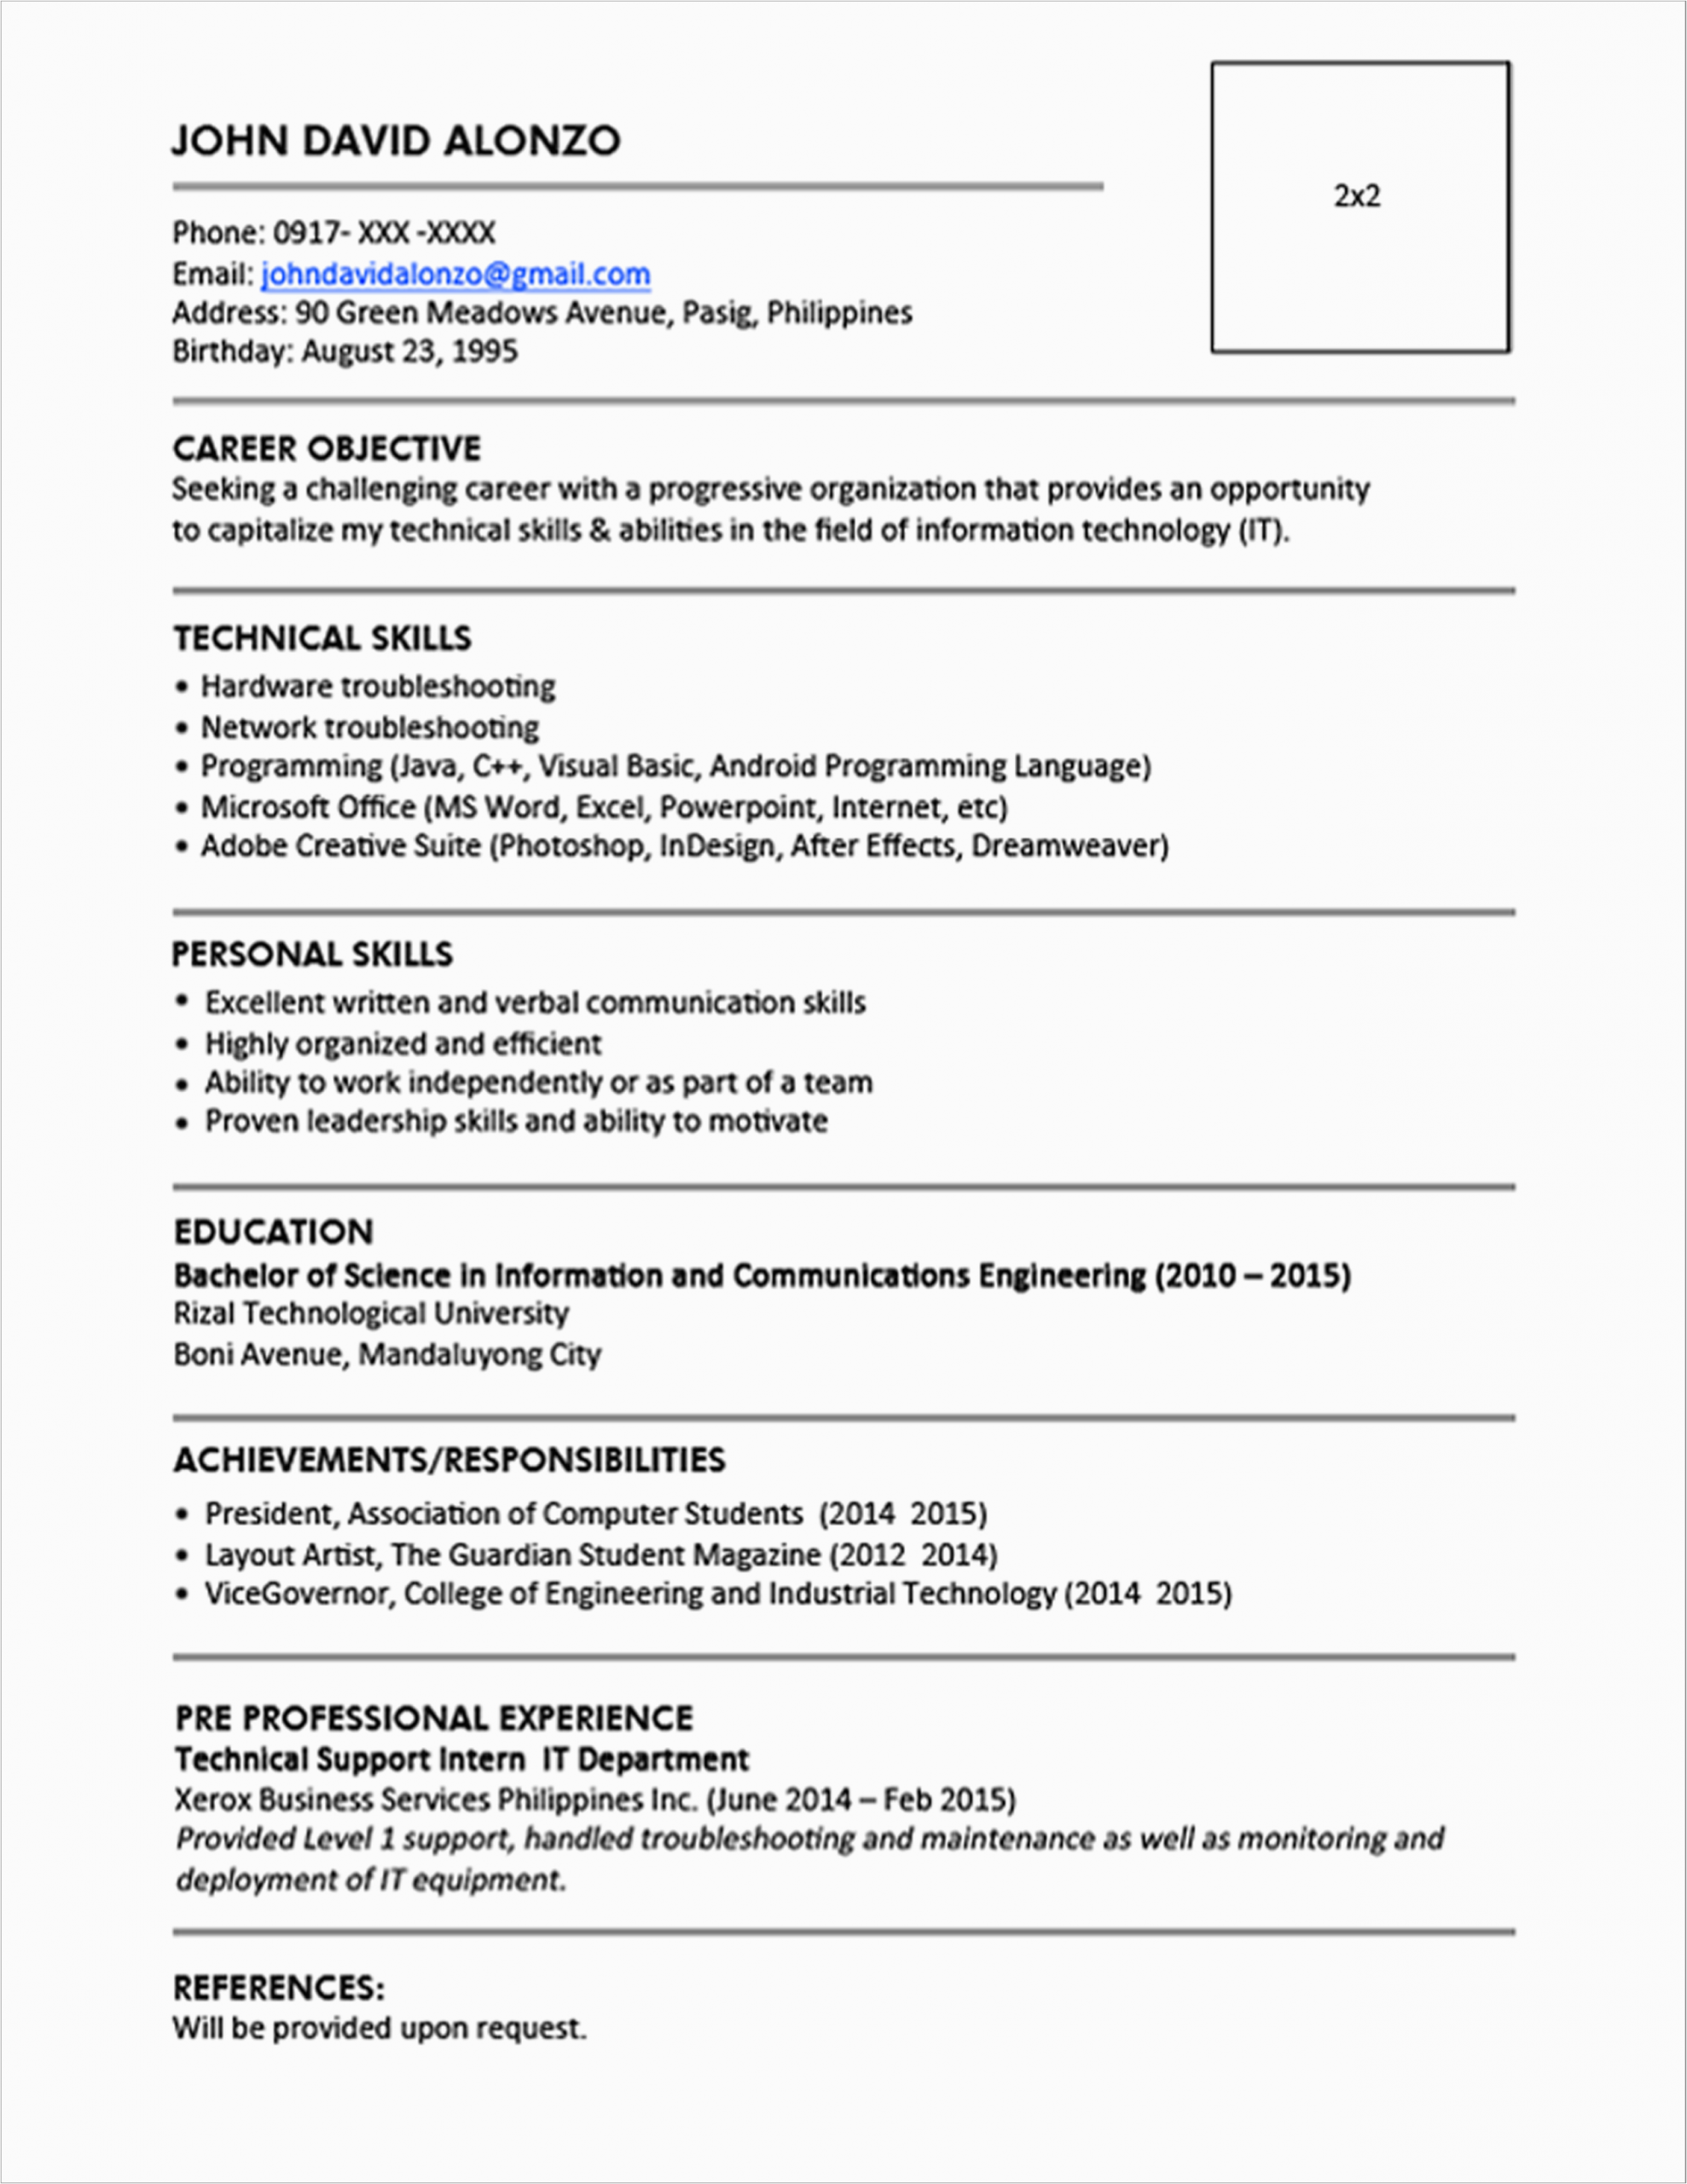 resume templates can